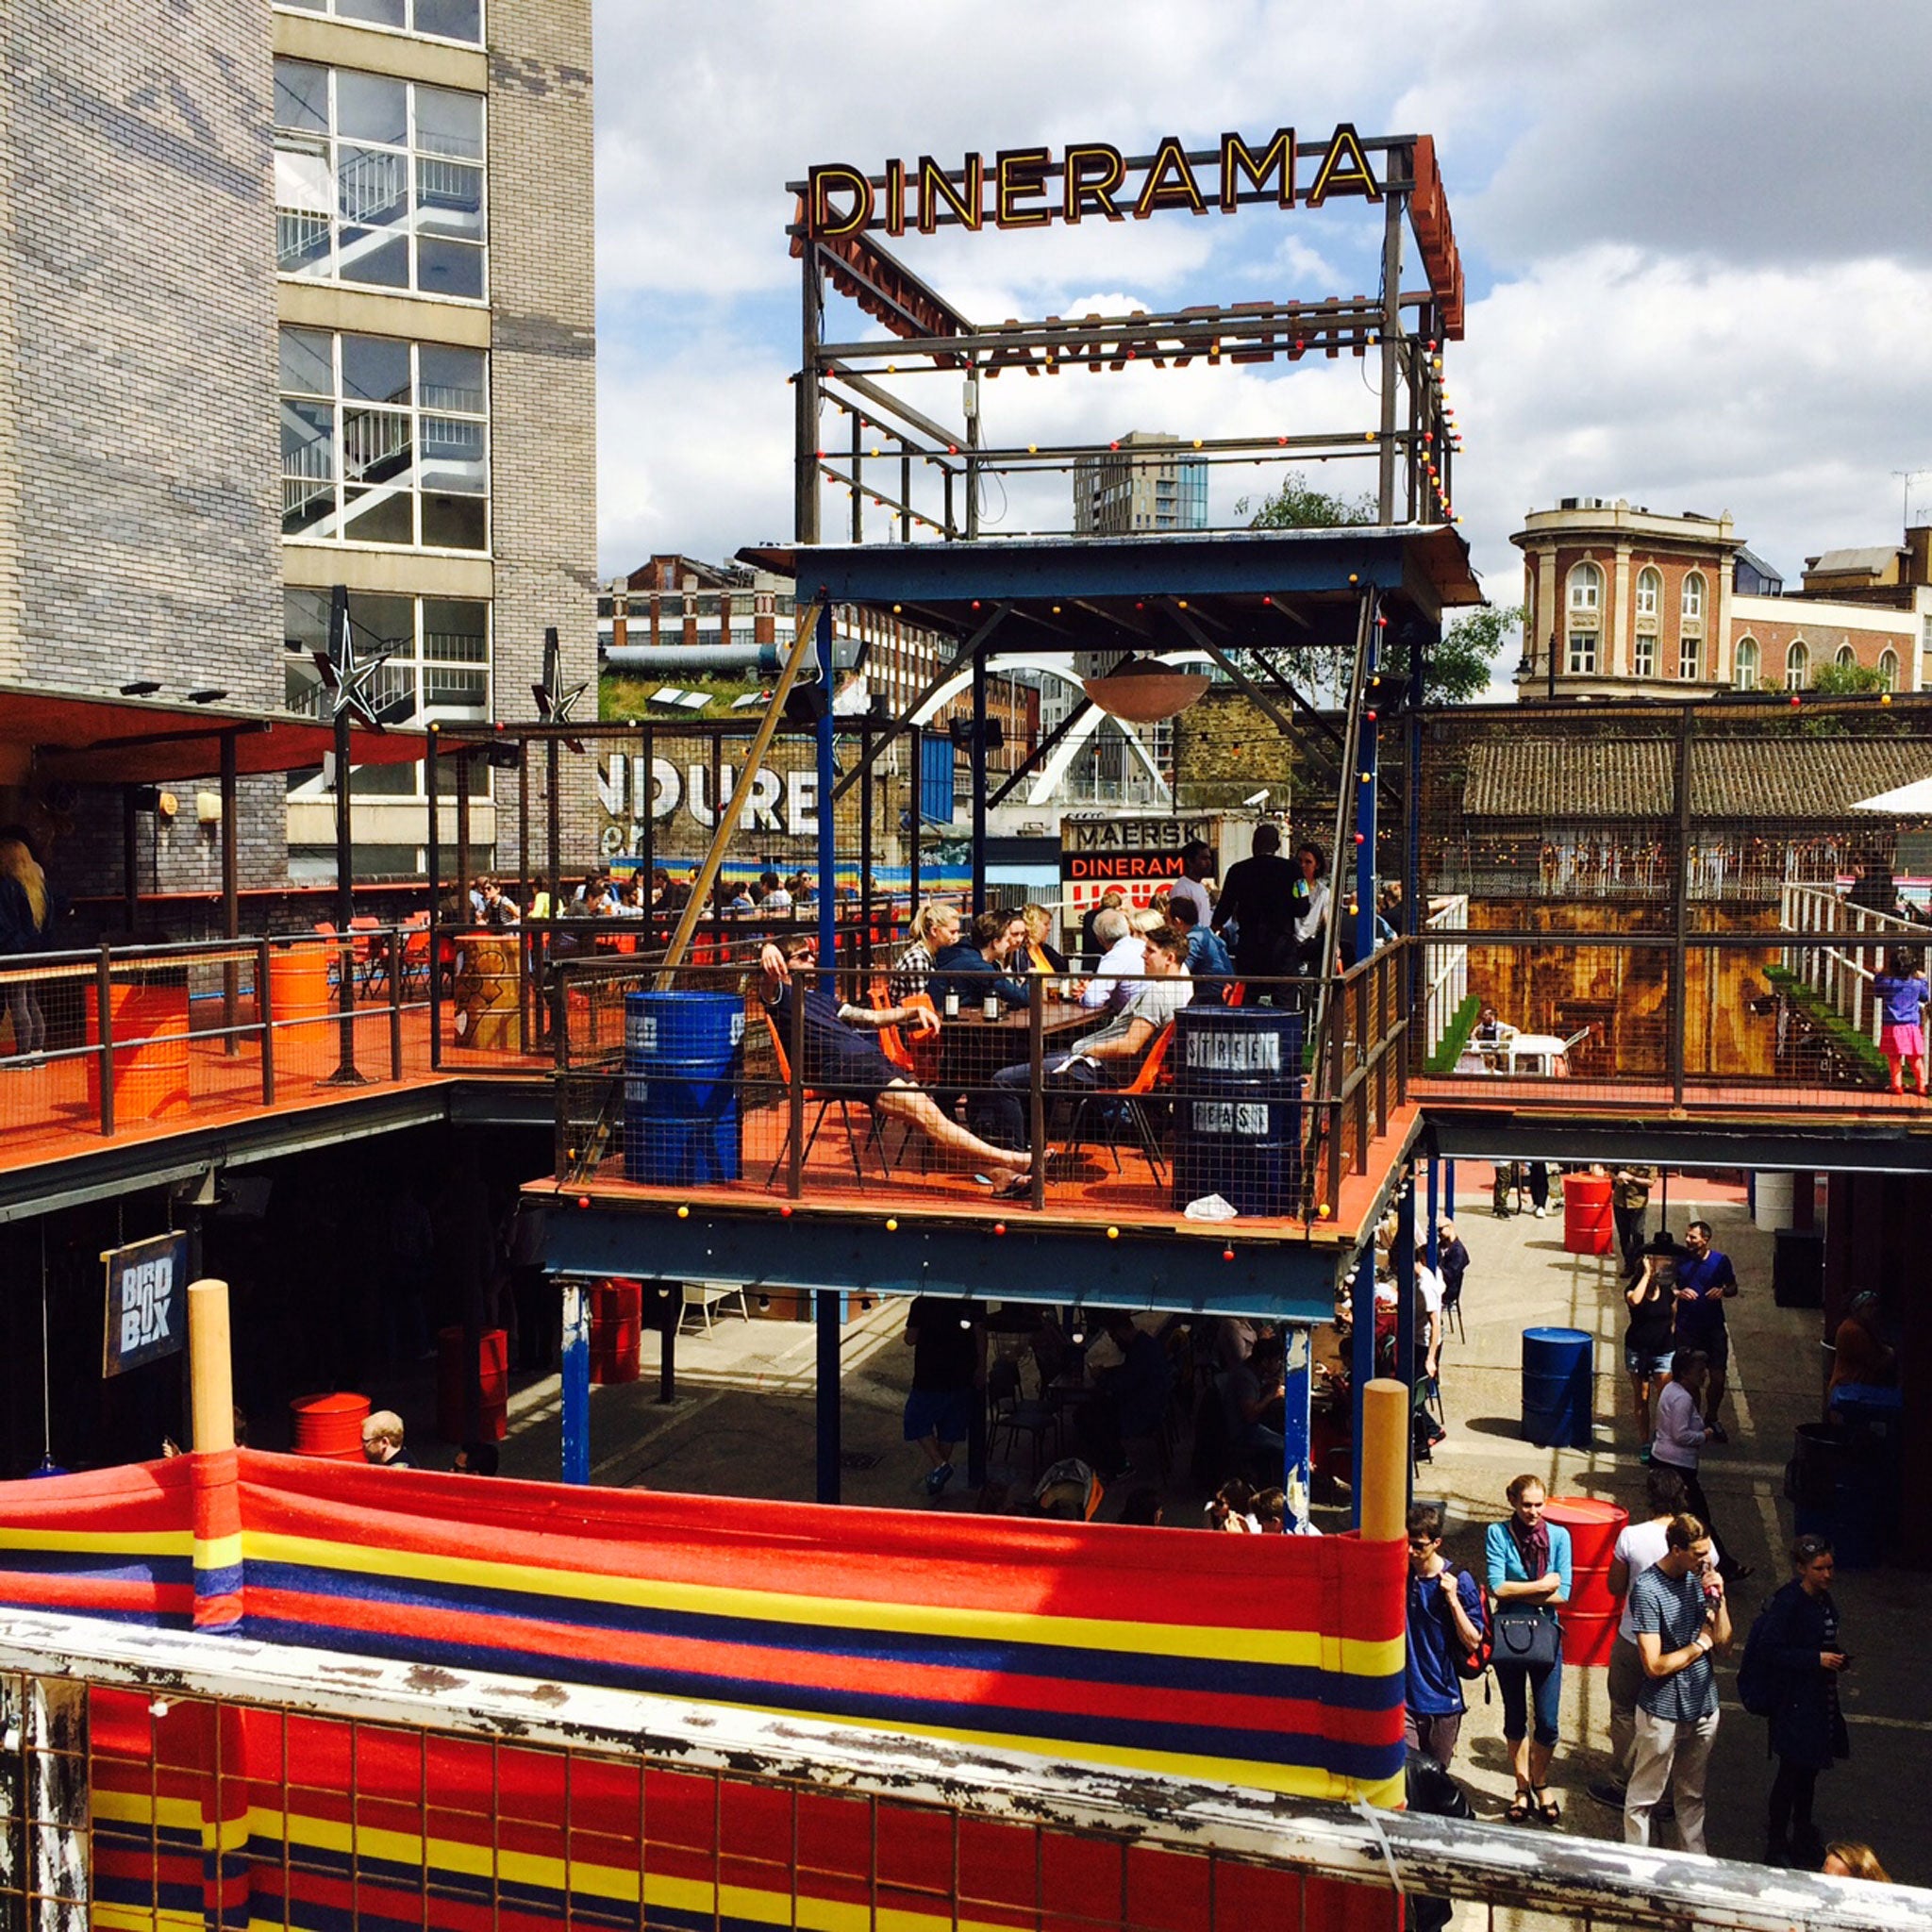 Dinerama is home to a properly structured and supported al-fresco food extravaganza